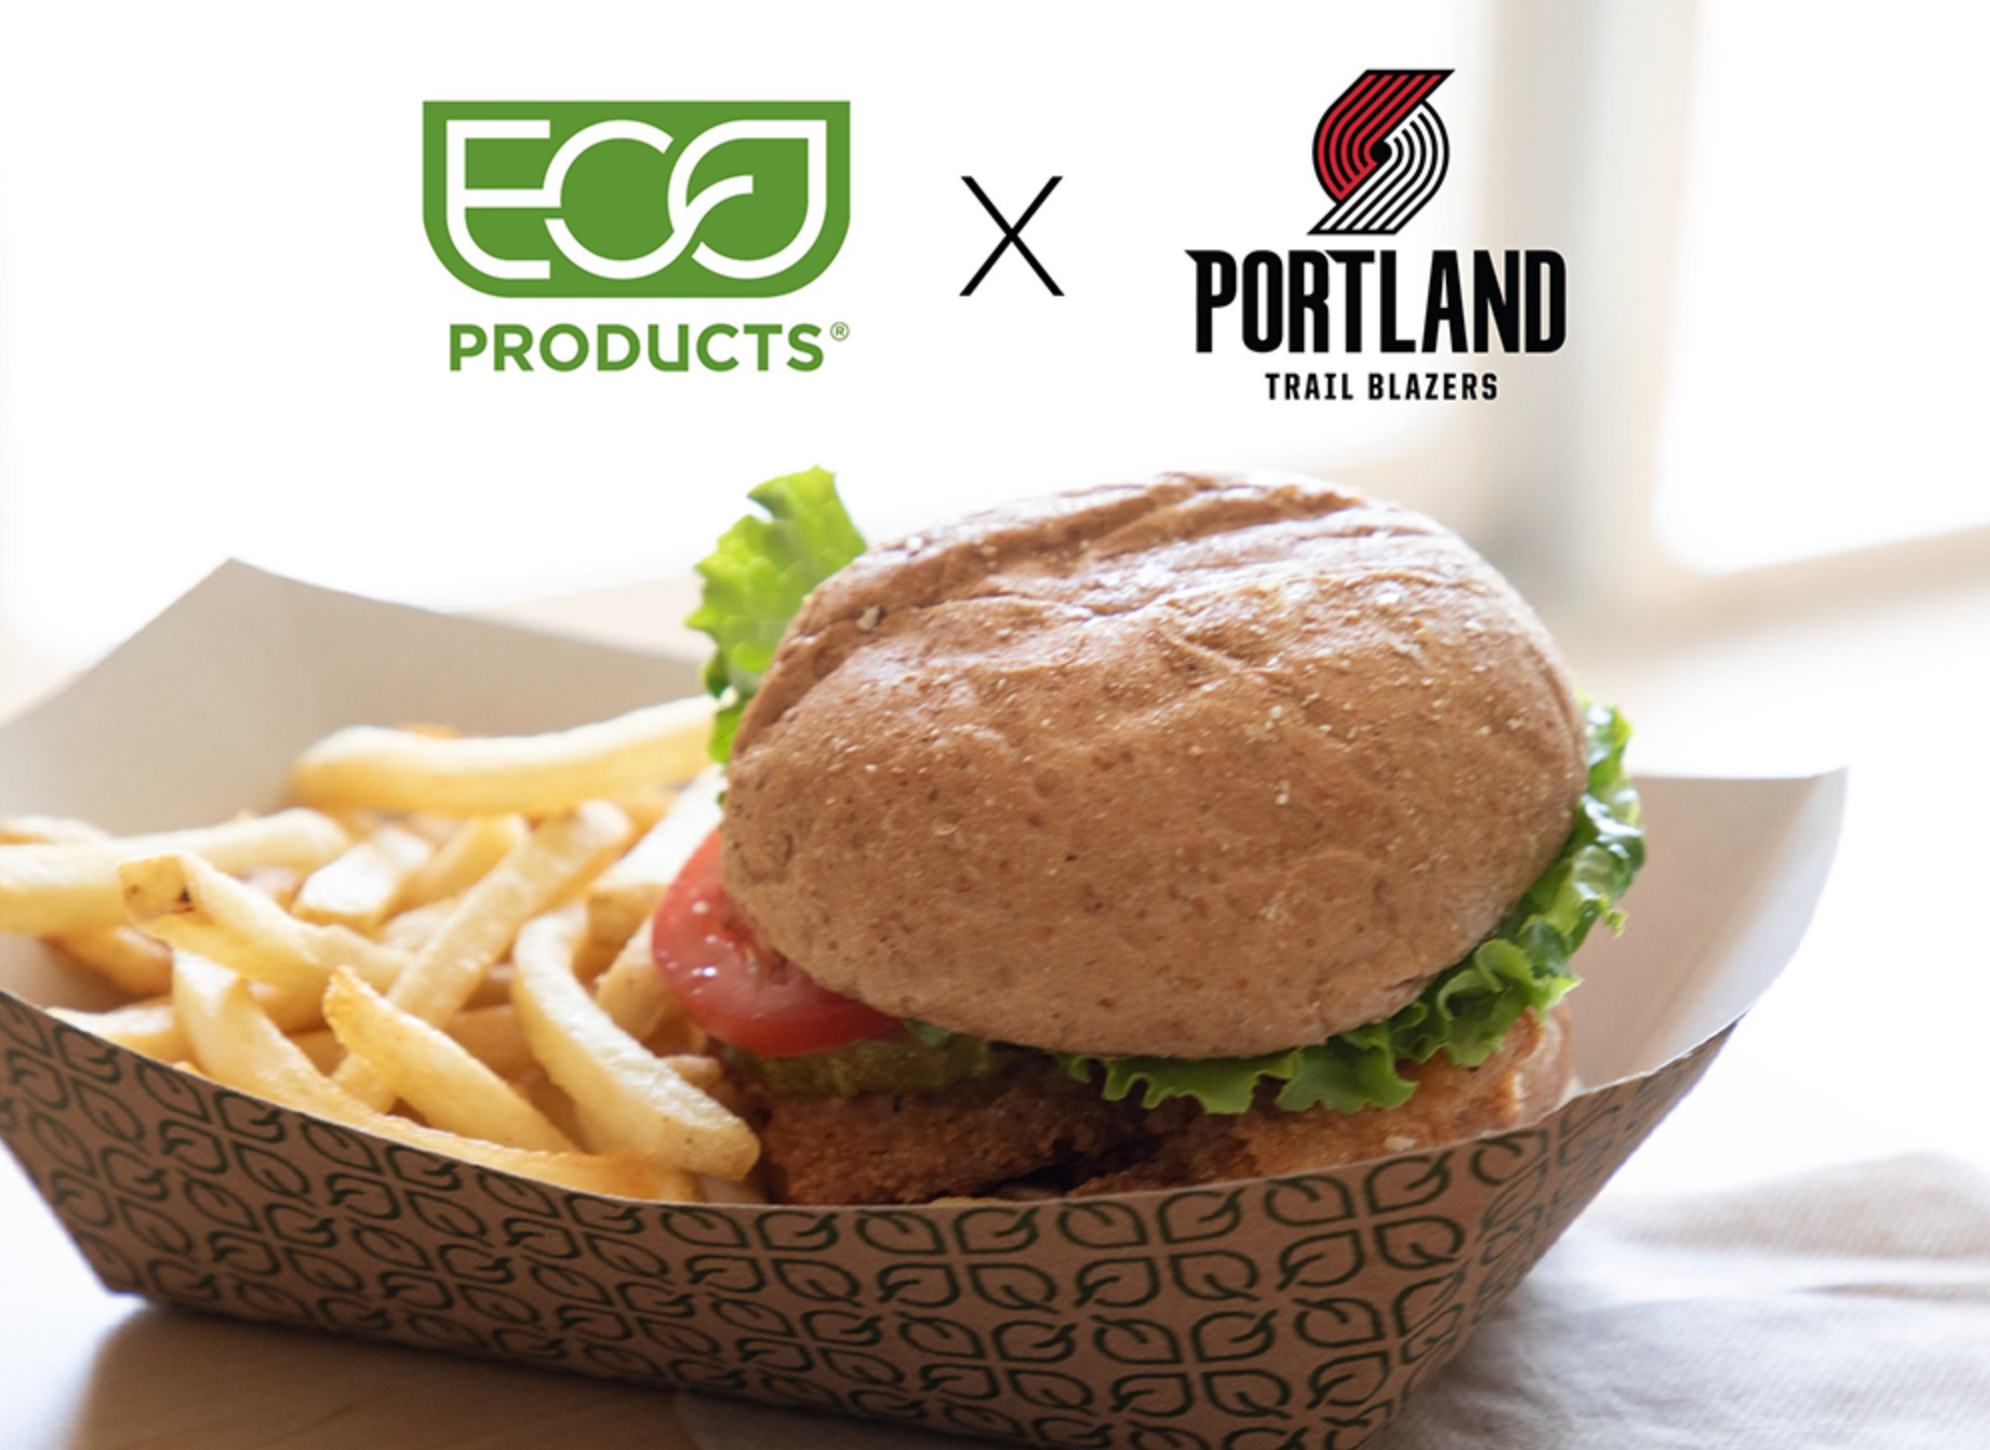 Portland Trail Blazers announce Eco-Products as an official zero waste partner